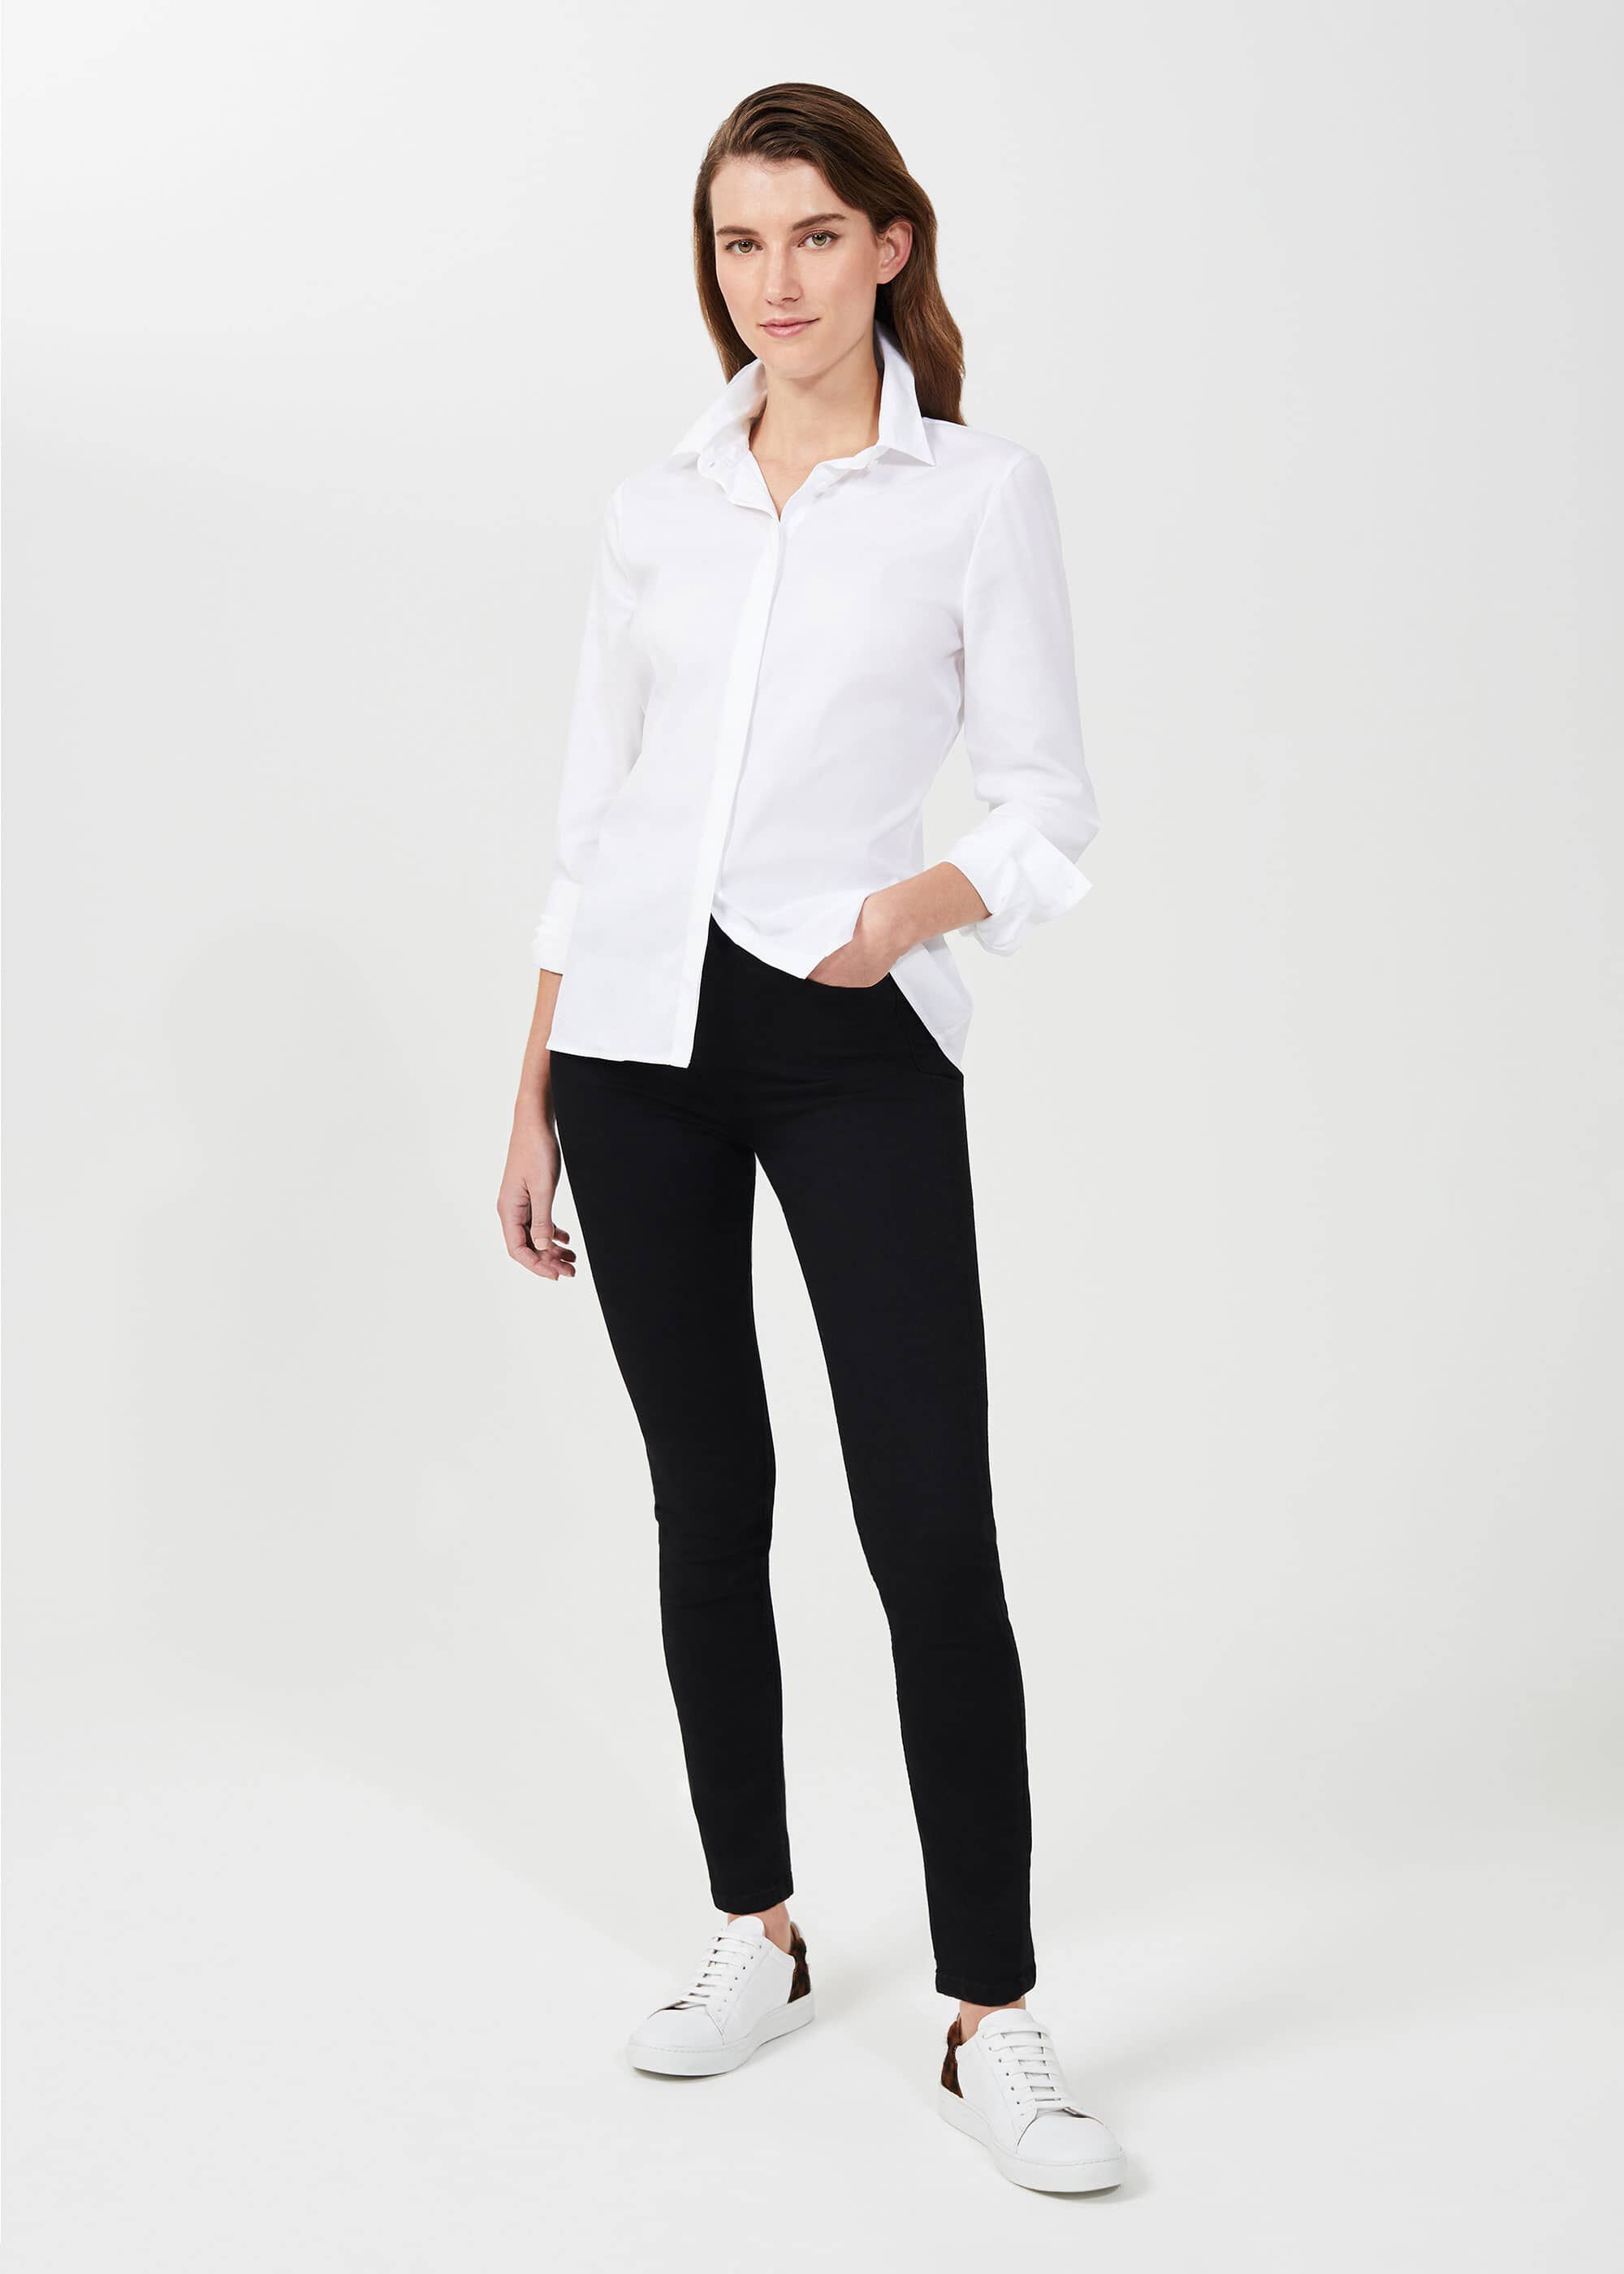 trouser suits for weddings petite